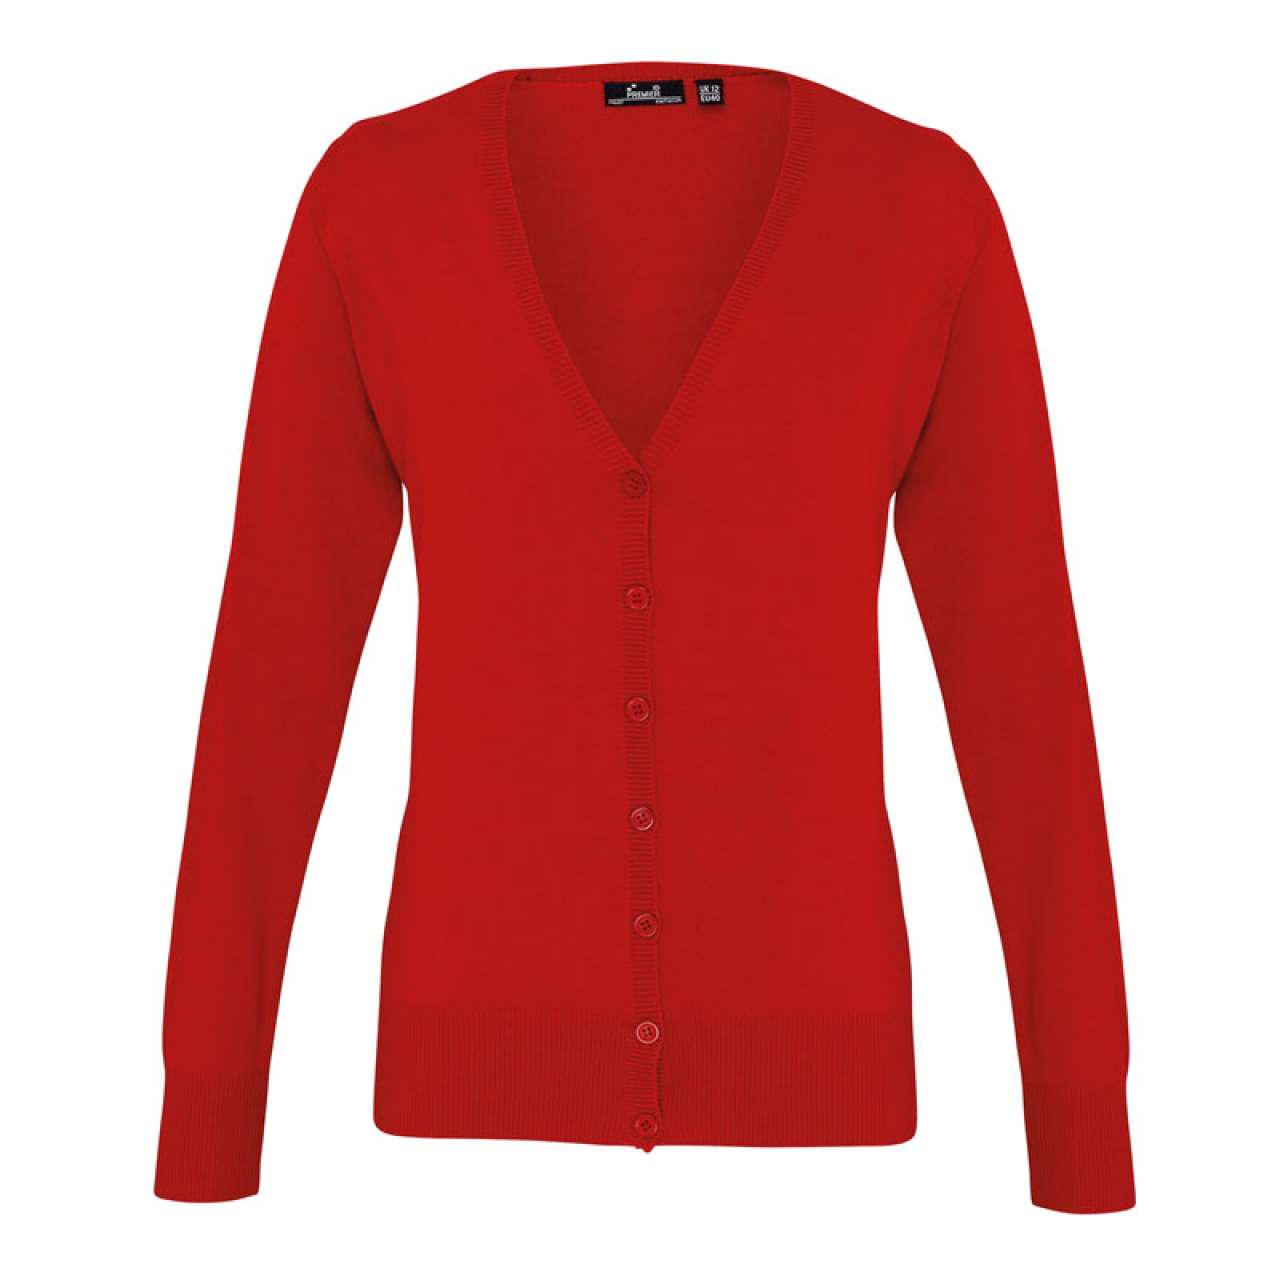 WOMEN'S BUTTON-THROUGH KNITTED CARDIGAN s logom 